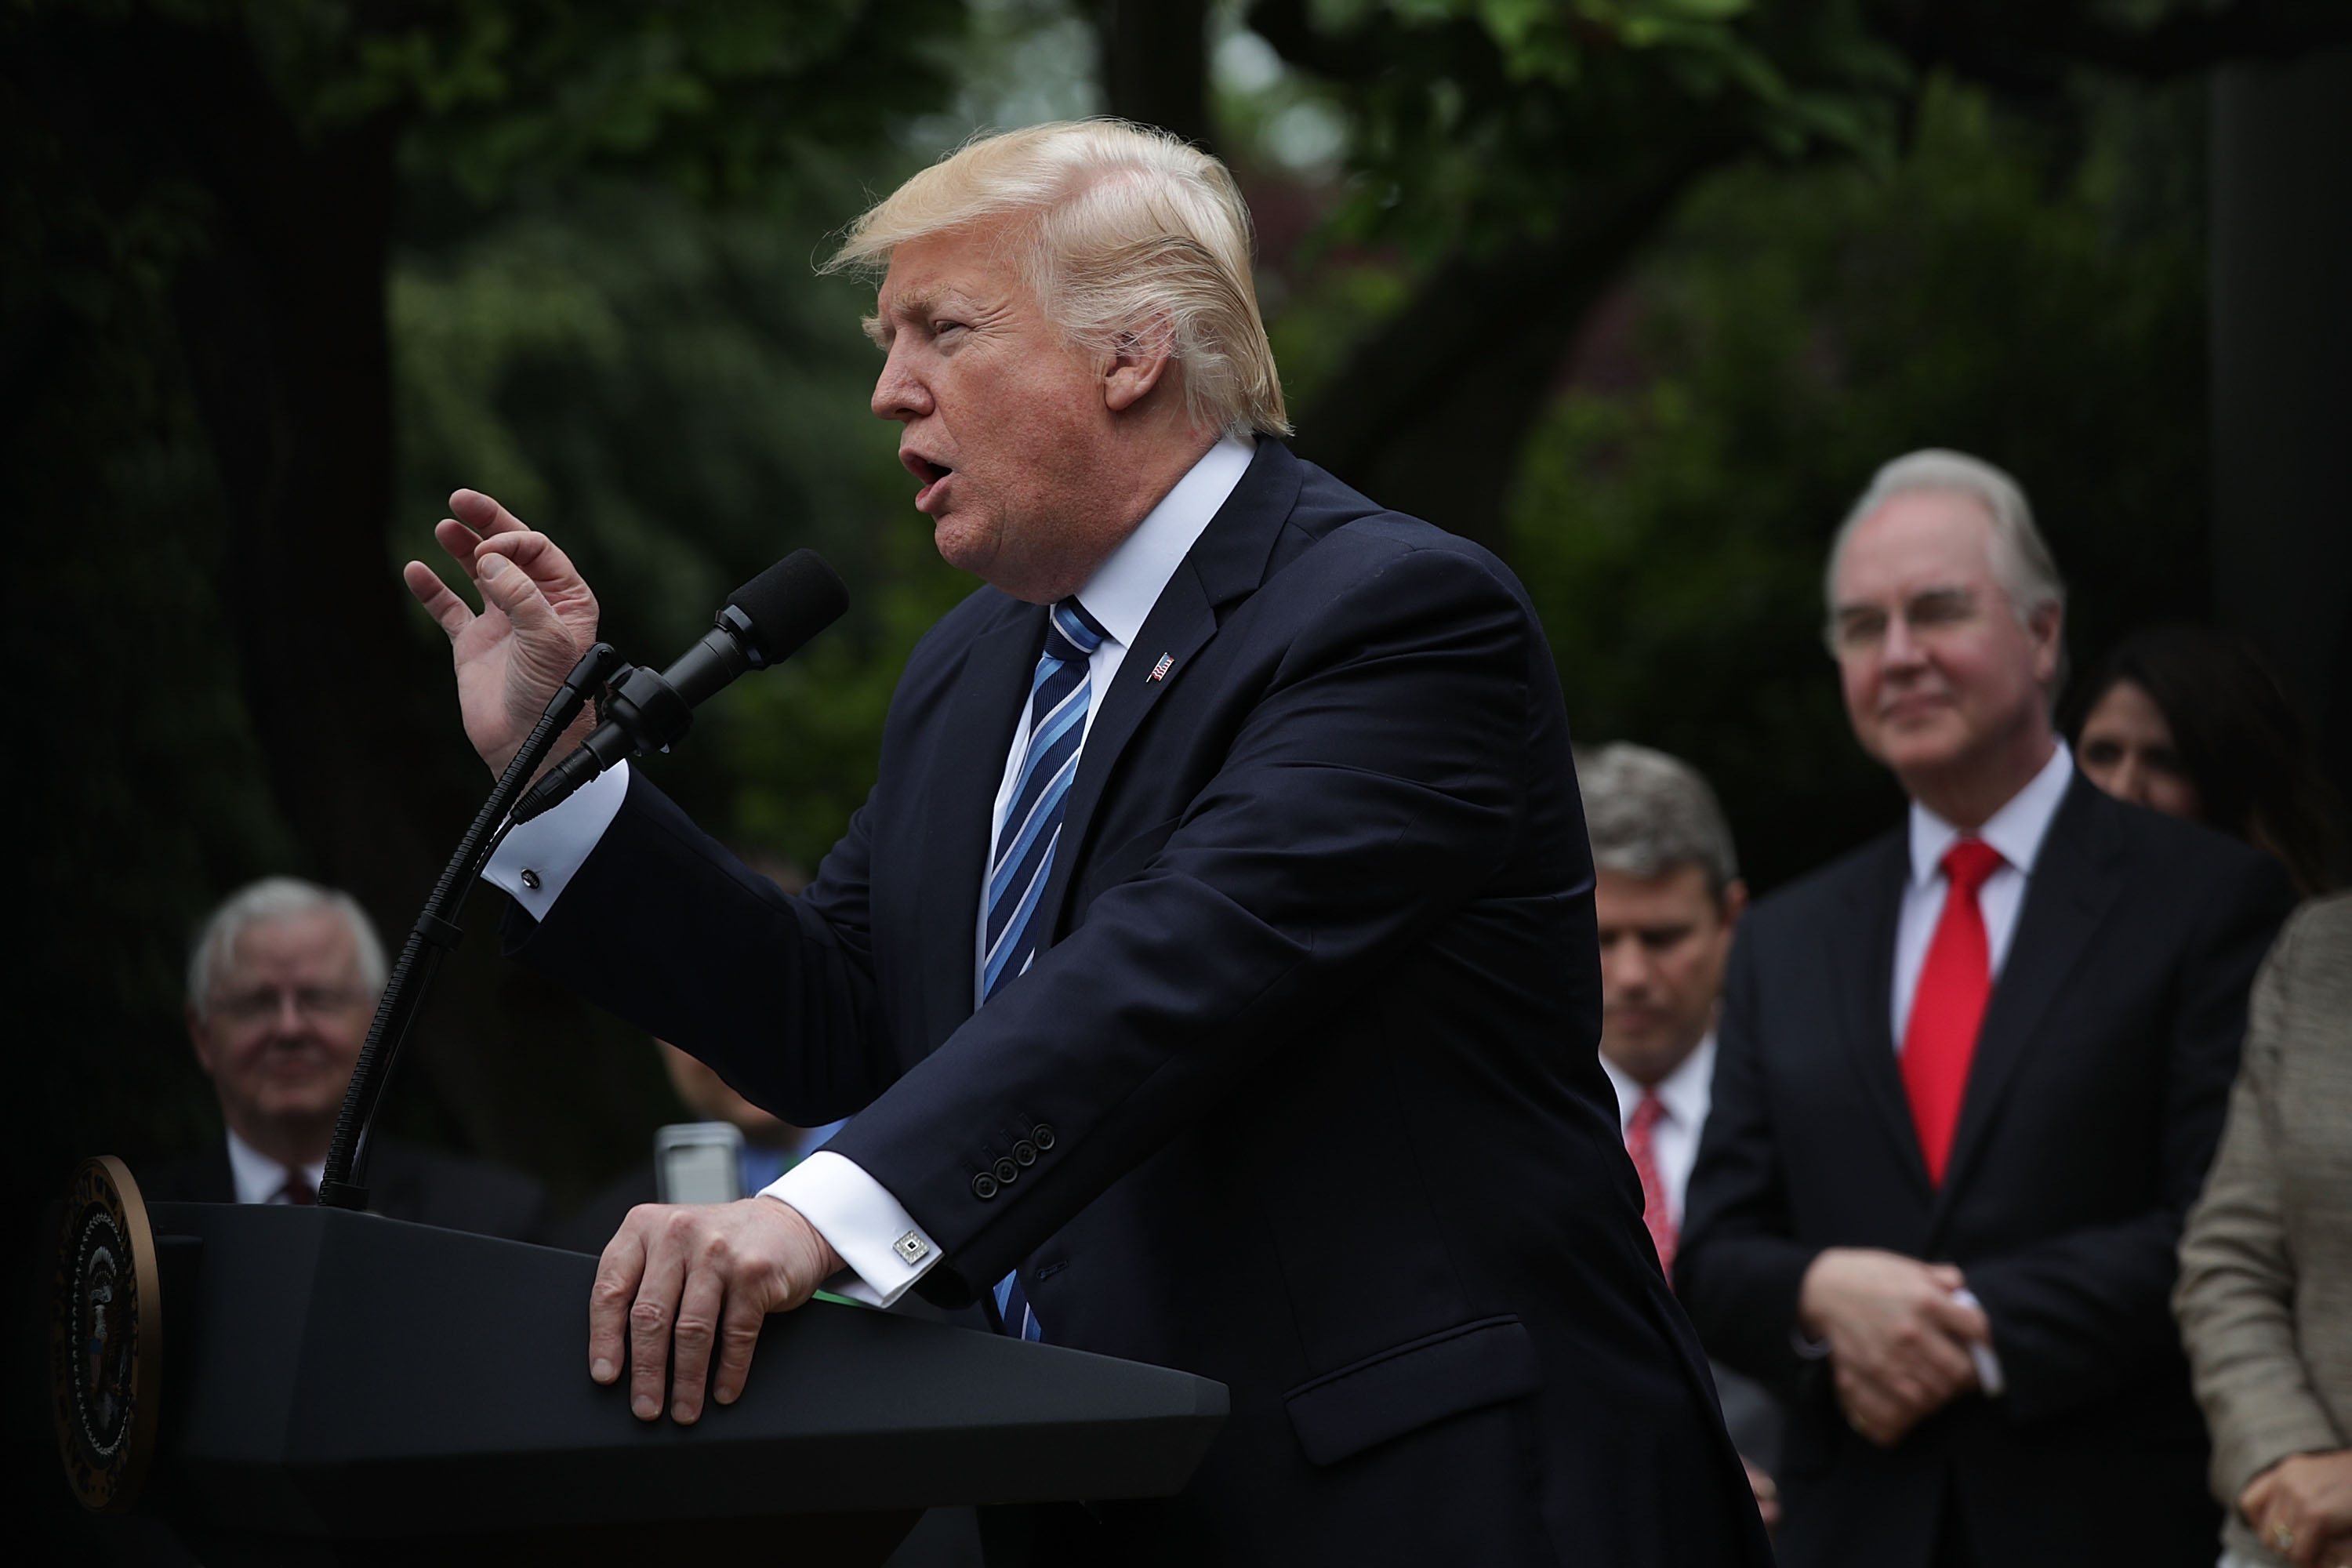 WASHINGTON, DC - MAY 04: U.S. President Donald Trump speaks as Health and Human Services Secretary Tom Price looks on during a Rose Garden event May 4, 2017 at the White House in Washington, DC. The House has passed the American Health Care Act that will replace the Obama era's Affordable Healthcare Act with a vote of 217-213. (Photo by Alex Wong/Getty Images)